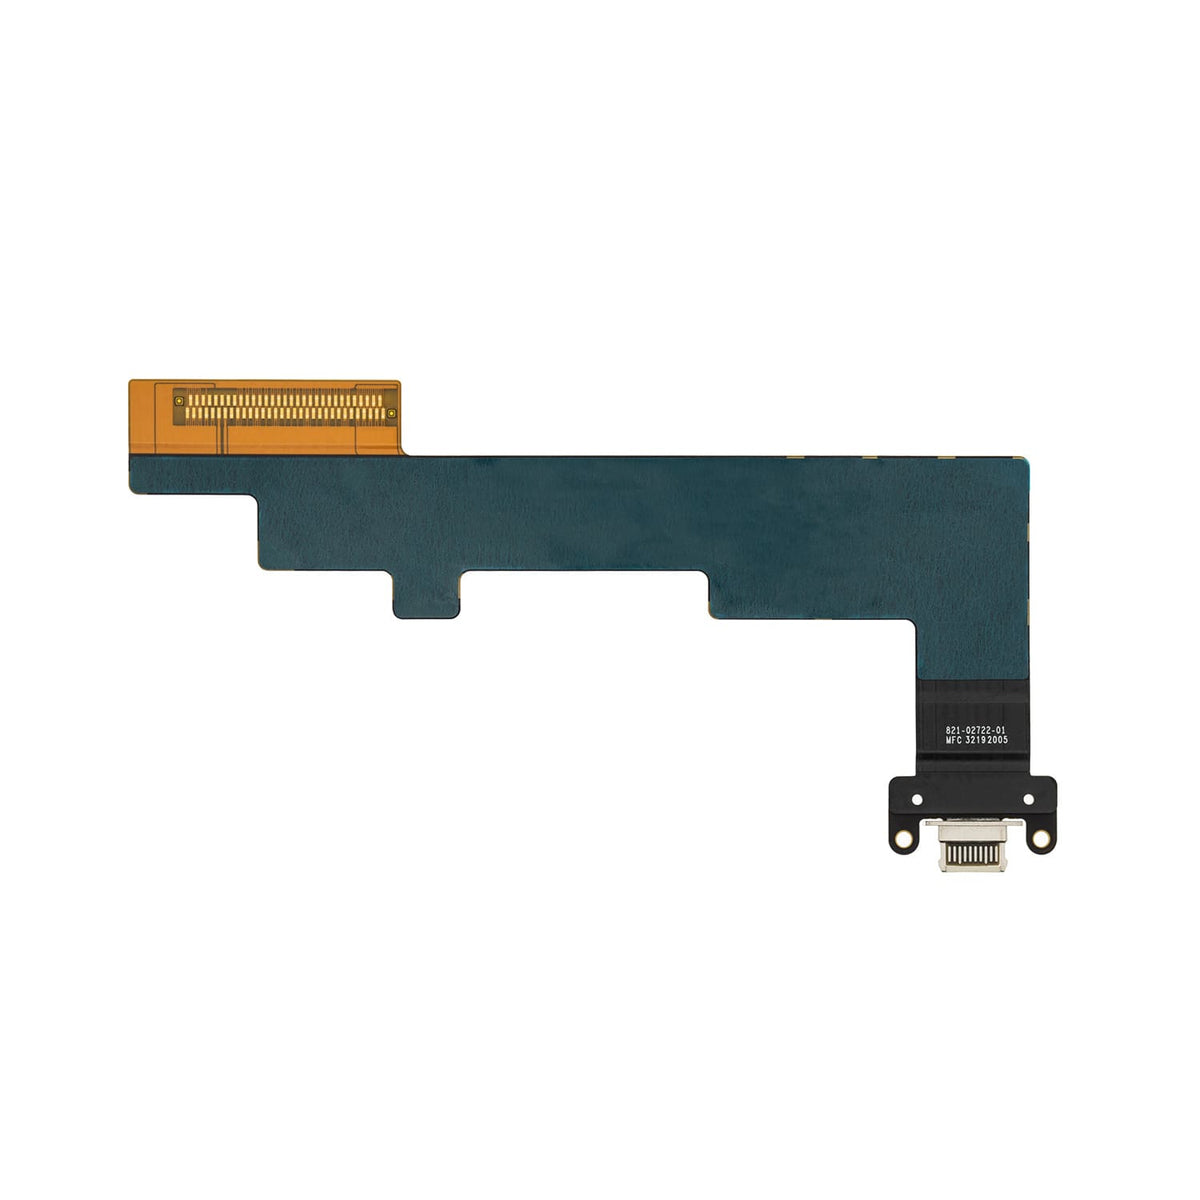 WHITE CHARGING CONNECTOR FLEX CABLE FOR IPAD AIR 4/5-4G VERSION